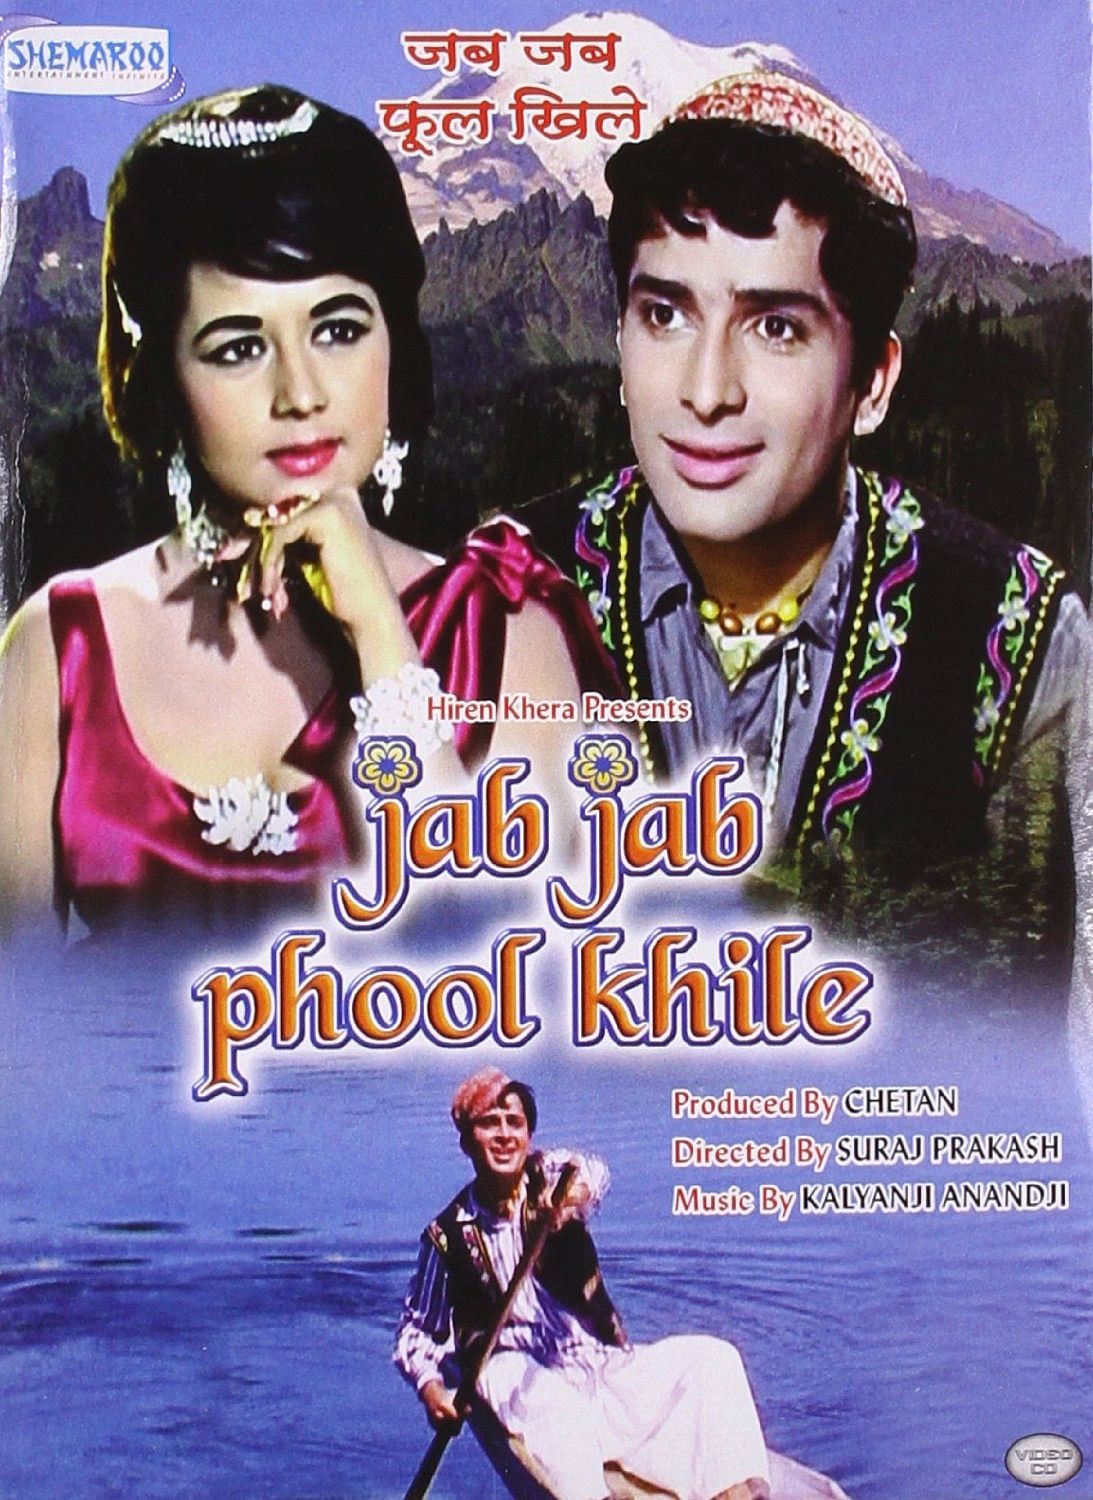 IFFI 2015 will hold a retrospective of Shashi Kapoor’s films